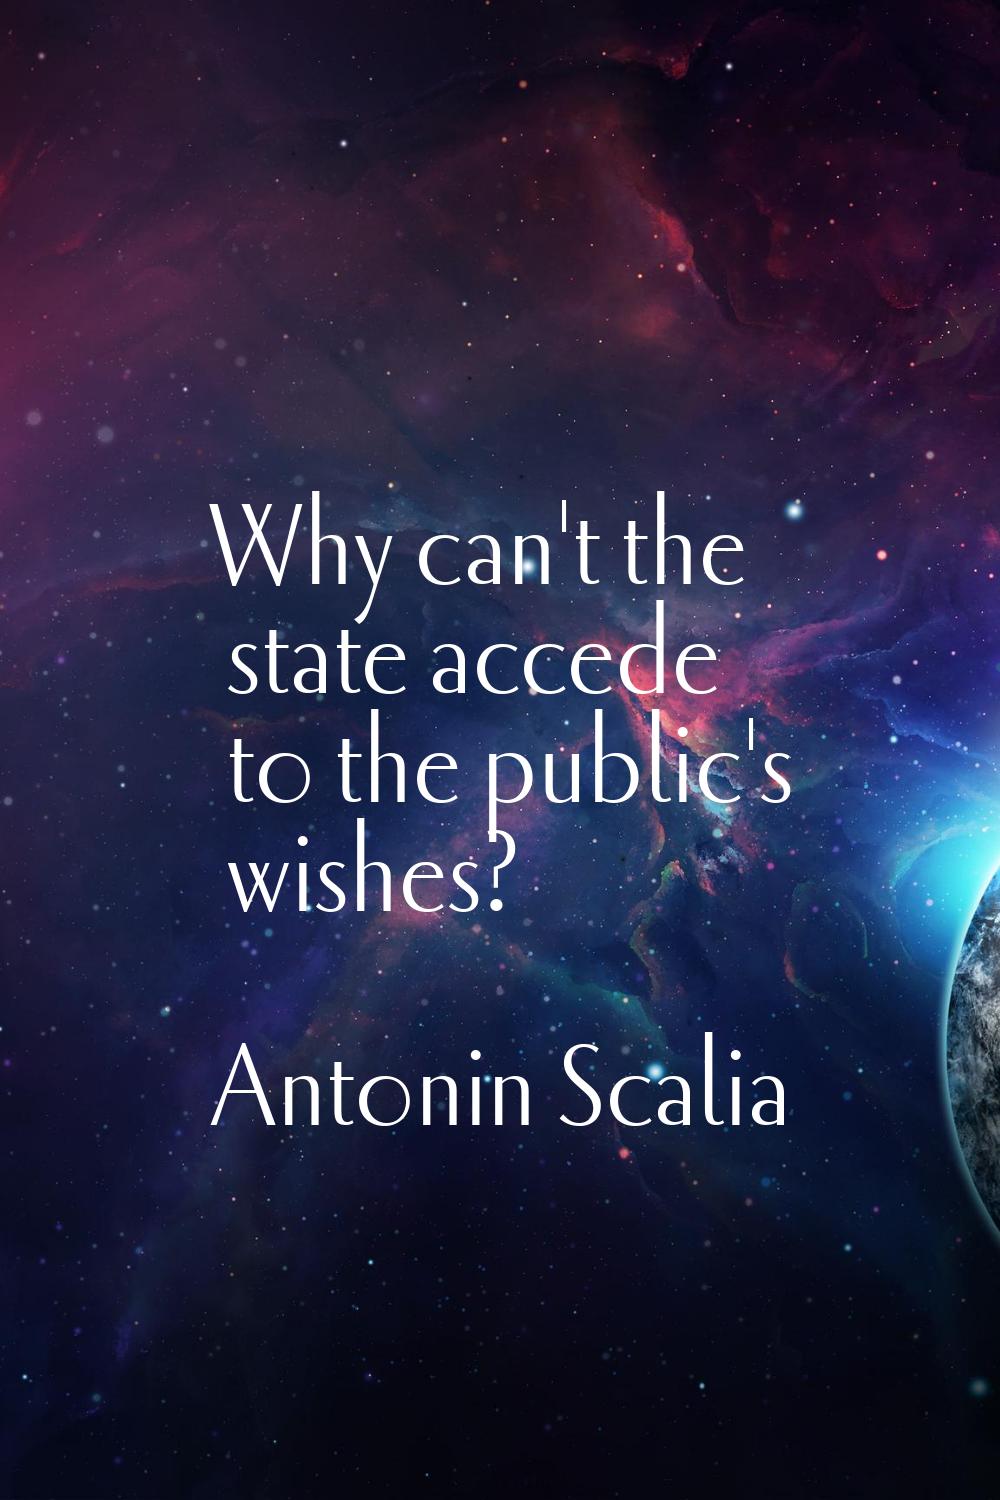 Why can't the state accede to the public's wishes?